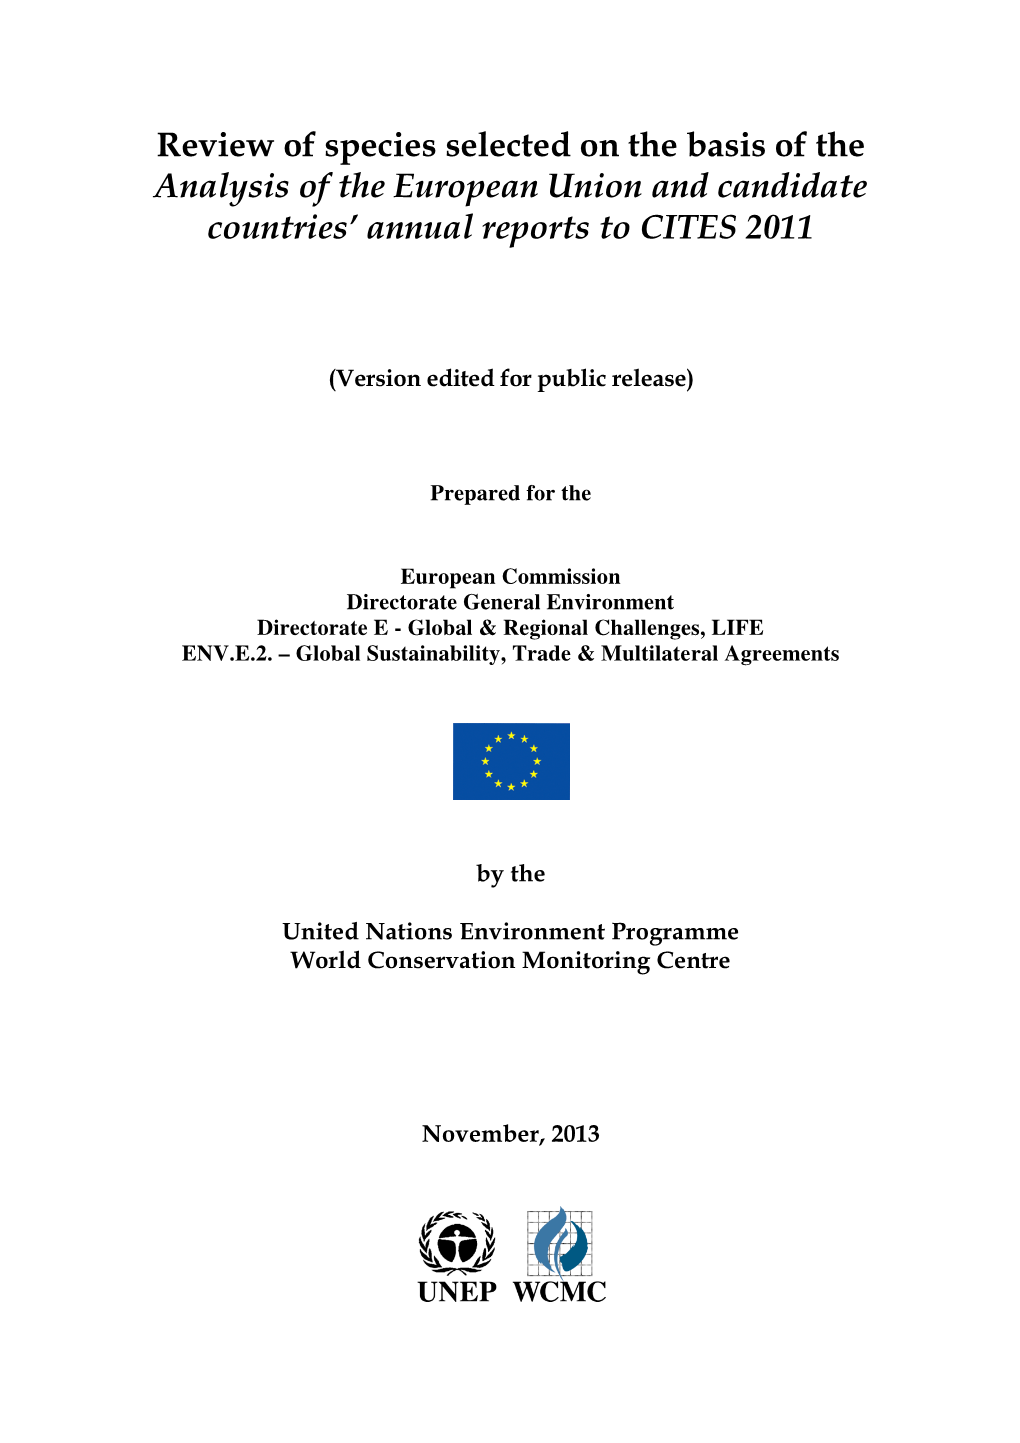 Review of Species Selected on the Basis of the Analysis of 2011 EU